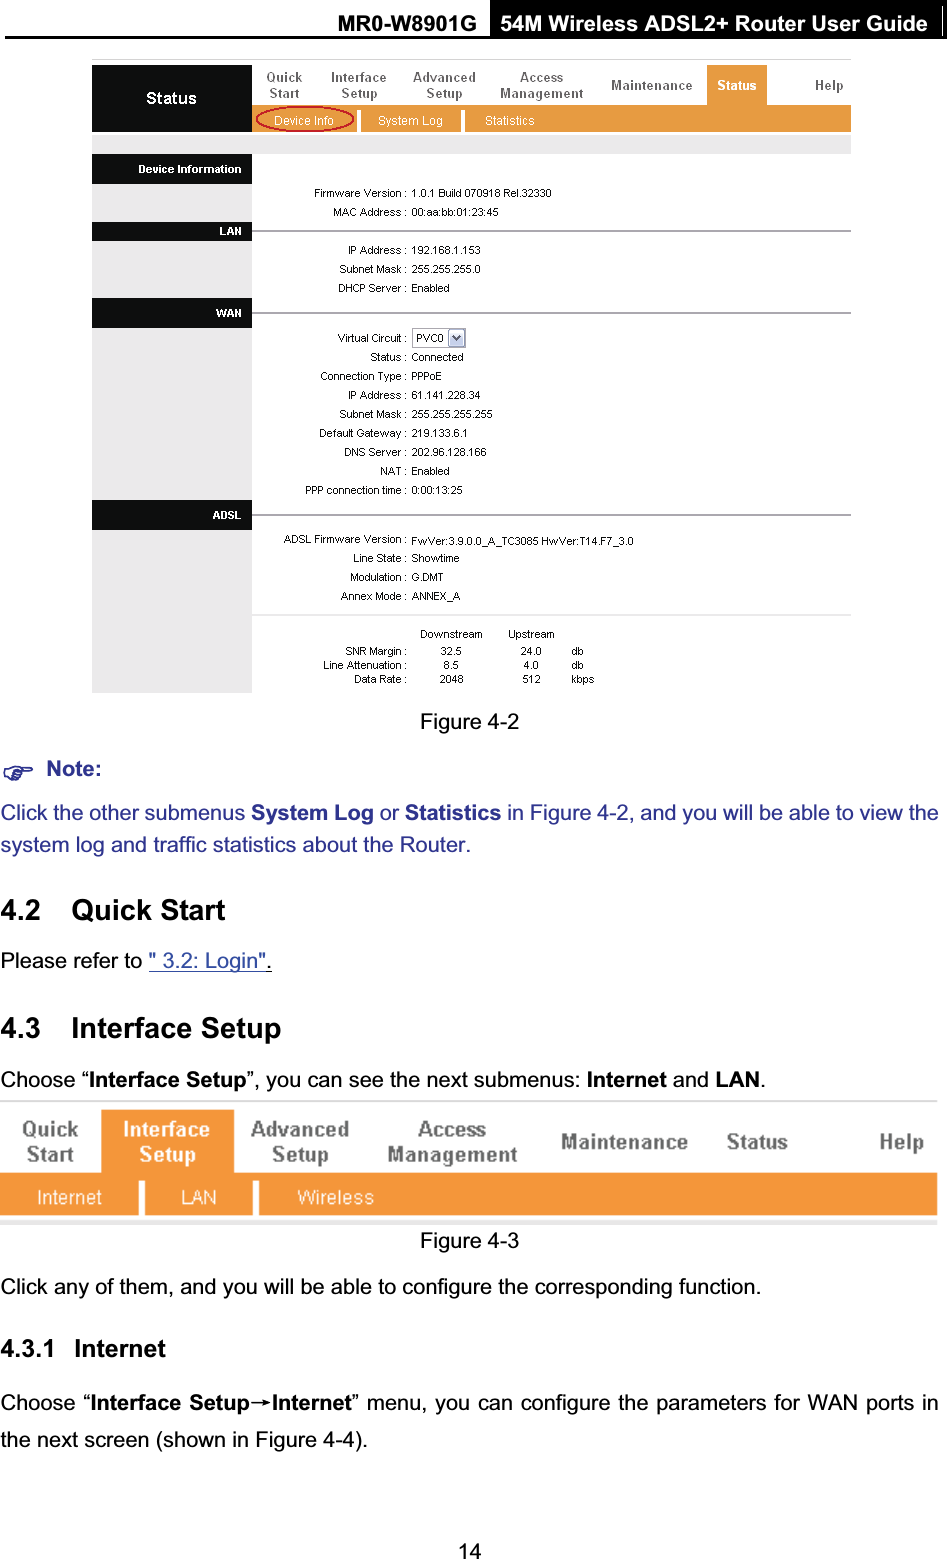 MR0-W8901G 54M Wireless ADSL2+ Router User Guide14Figure 4-2 )Note:Click the other submenus System Log or Statistics in Figure 4-2, and you will be able to view the system log and traffic statistics about the Router. 4.2 Quick Start Please refer to &quot; 3.2: Login&quot;.4.3 Interface Setup Choose “Interface Setup”, you can see the next submenus: Internet and LAN.Figure 4-3 Click any of them, and you will be able to configure the corresponding function. 4.3.1 InternetChoose “Interface SetupėInternet” menu, you can configure the parameters for WAN ports in the next screen (shown in Figure 4-4). 